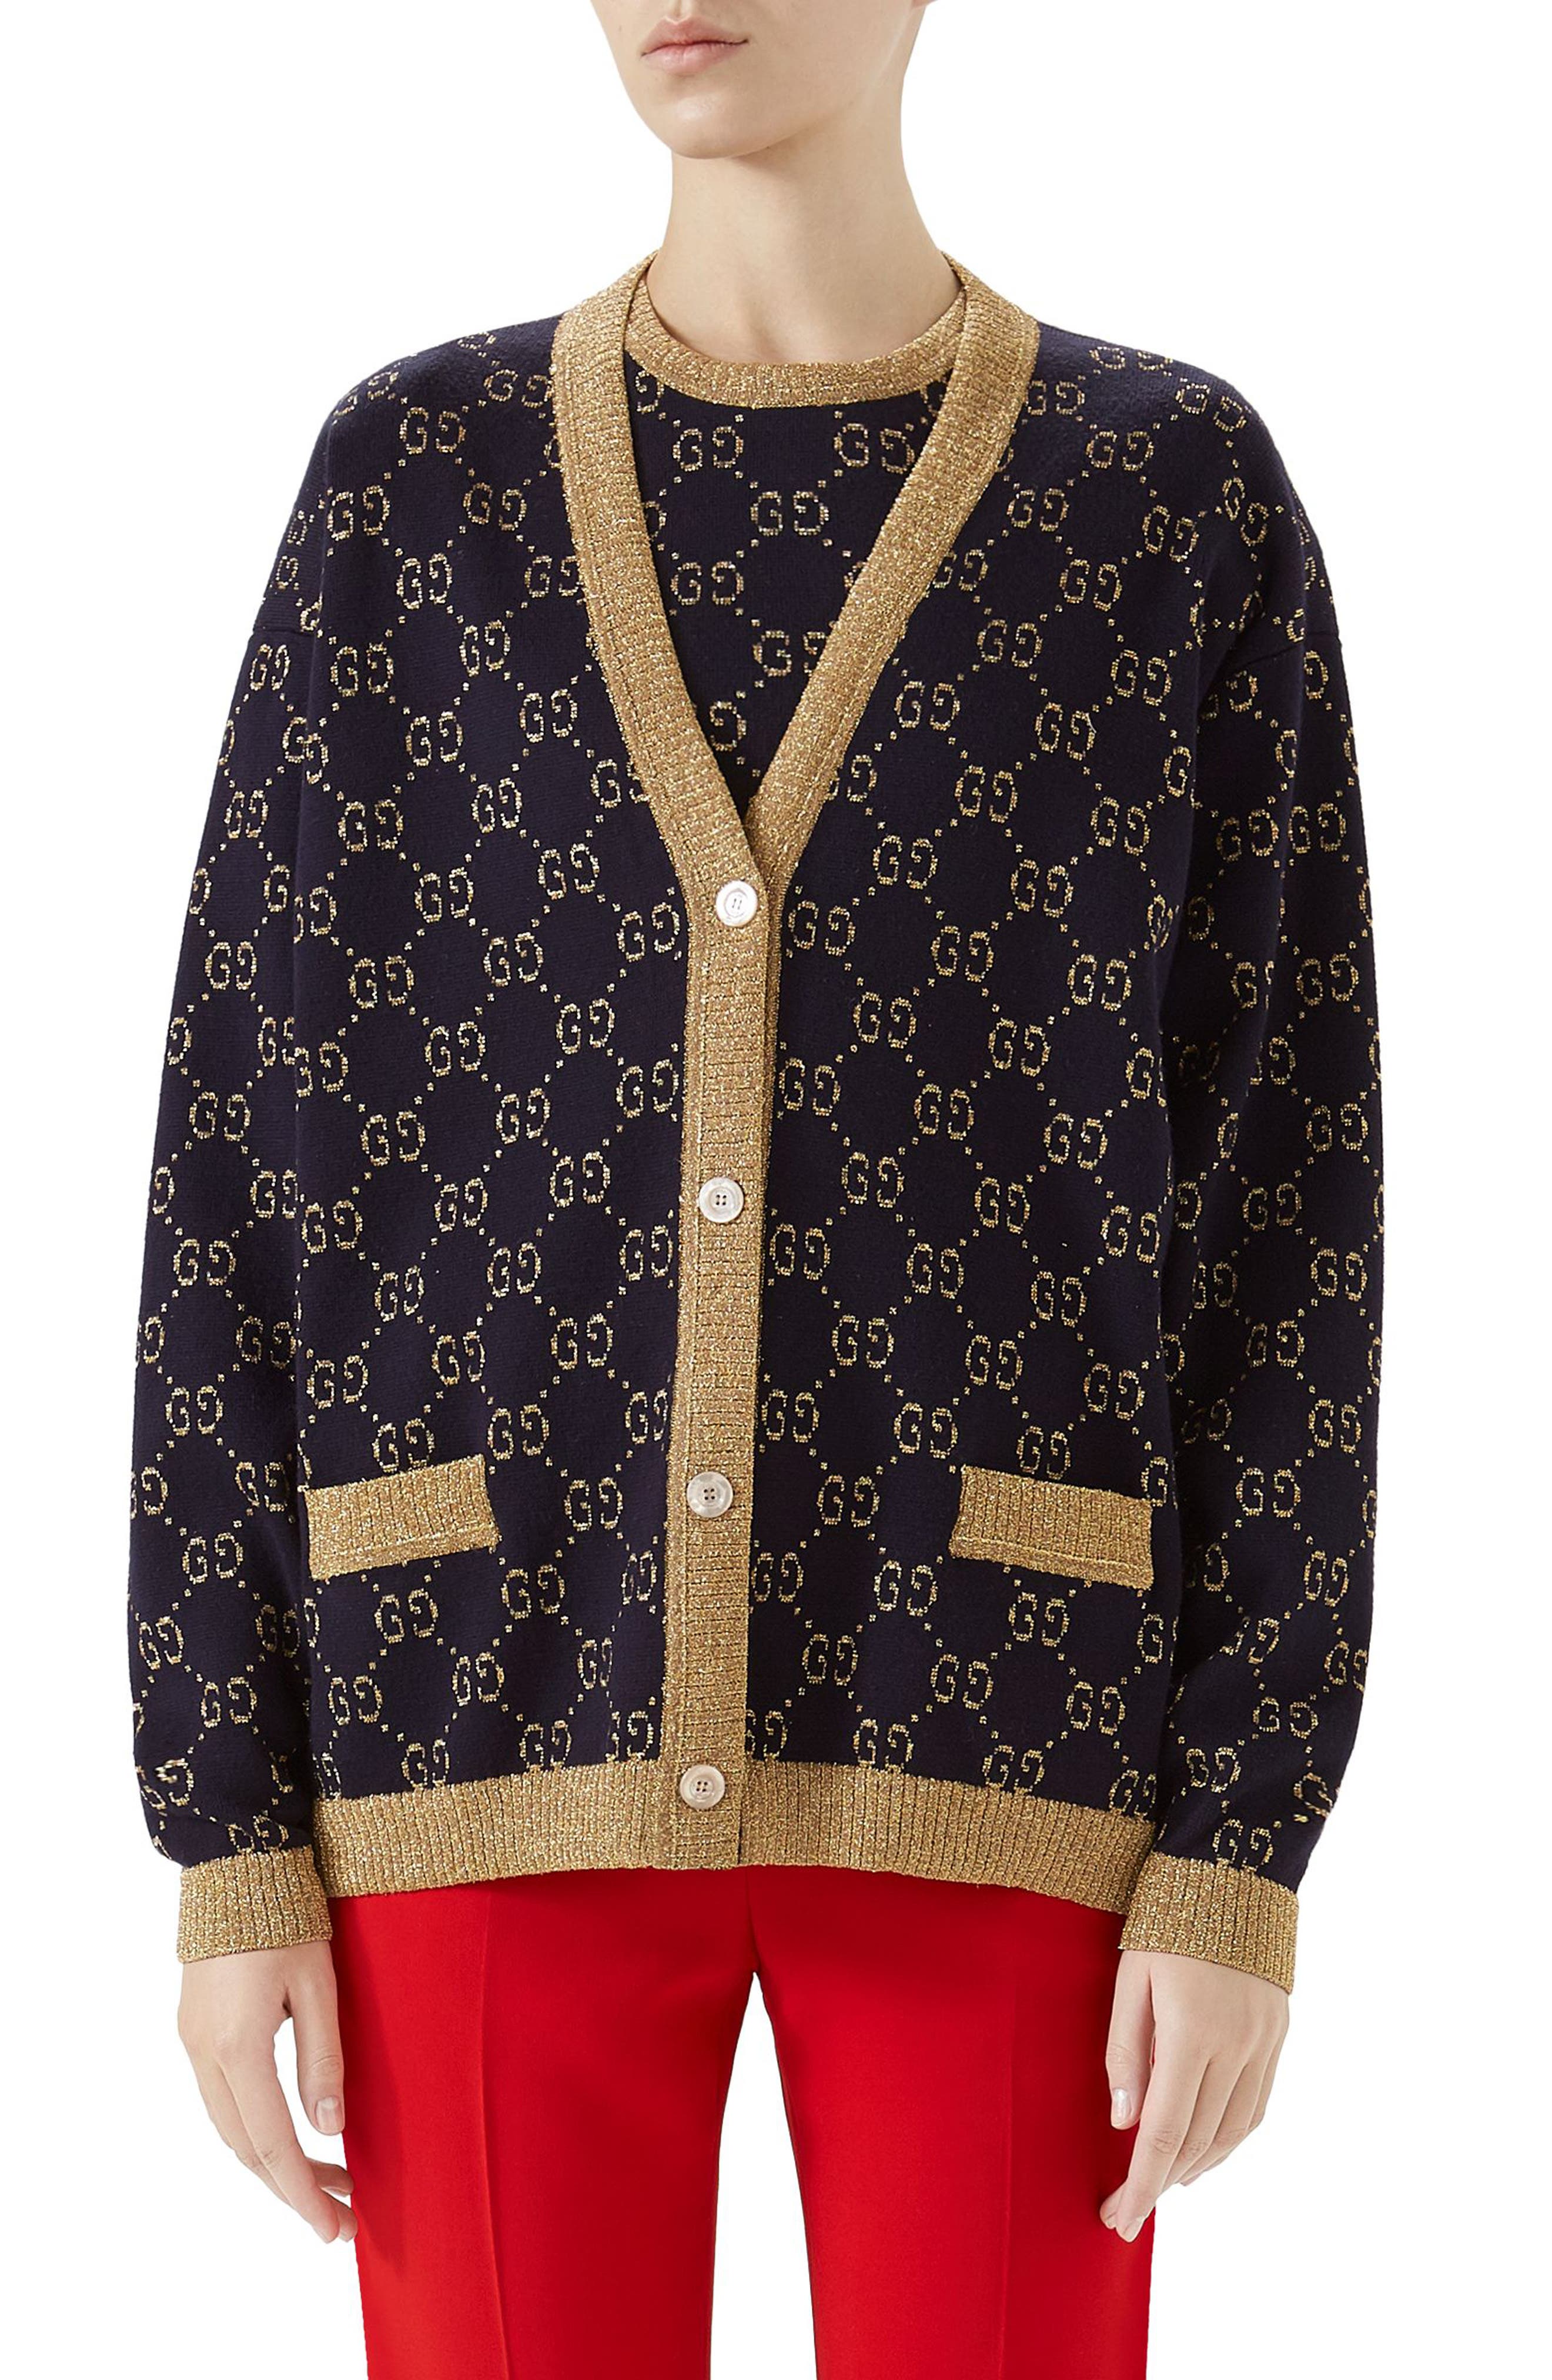 gucci sweater nordstrom